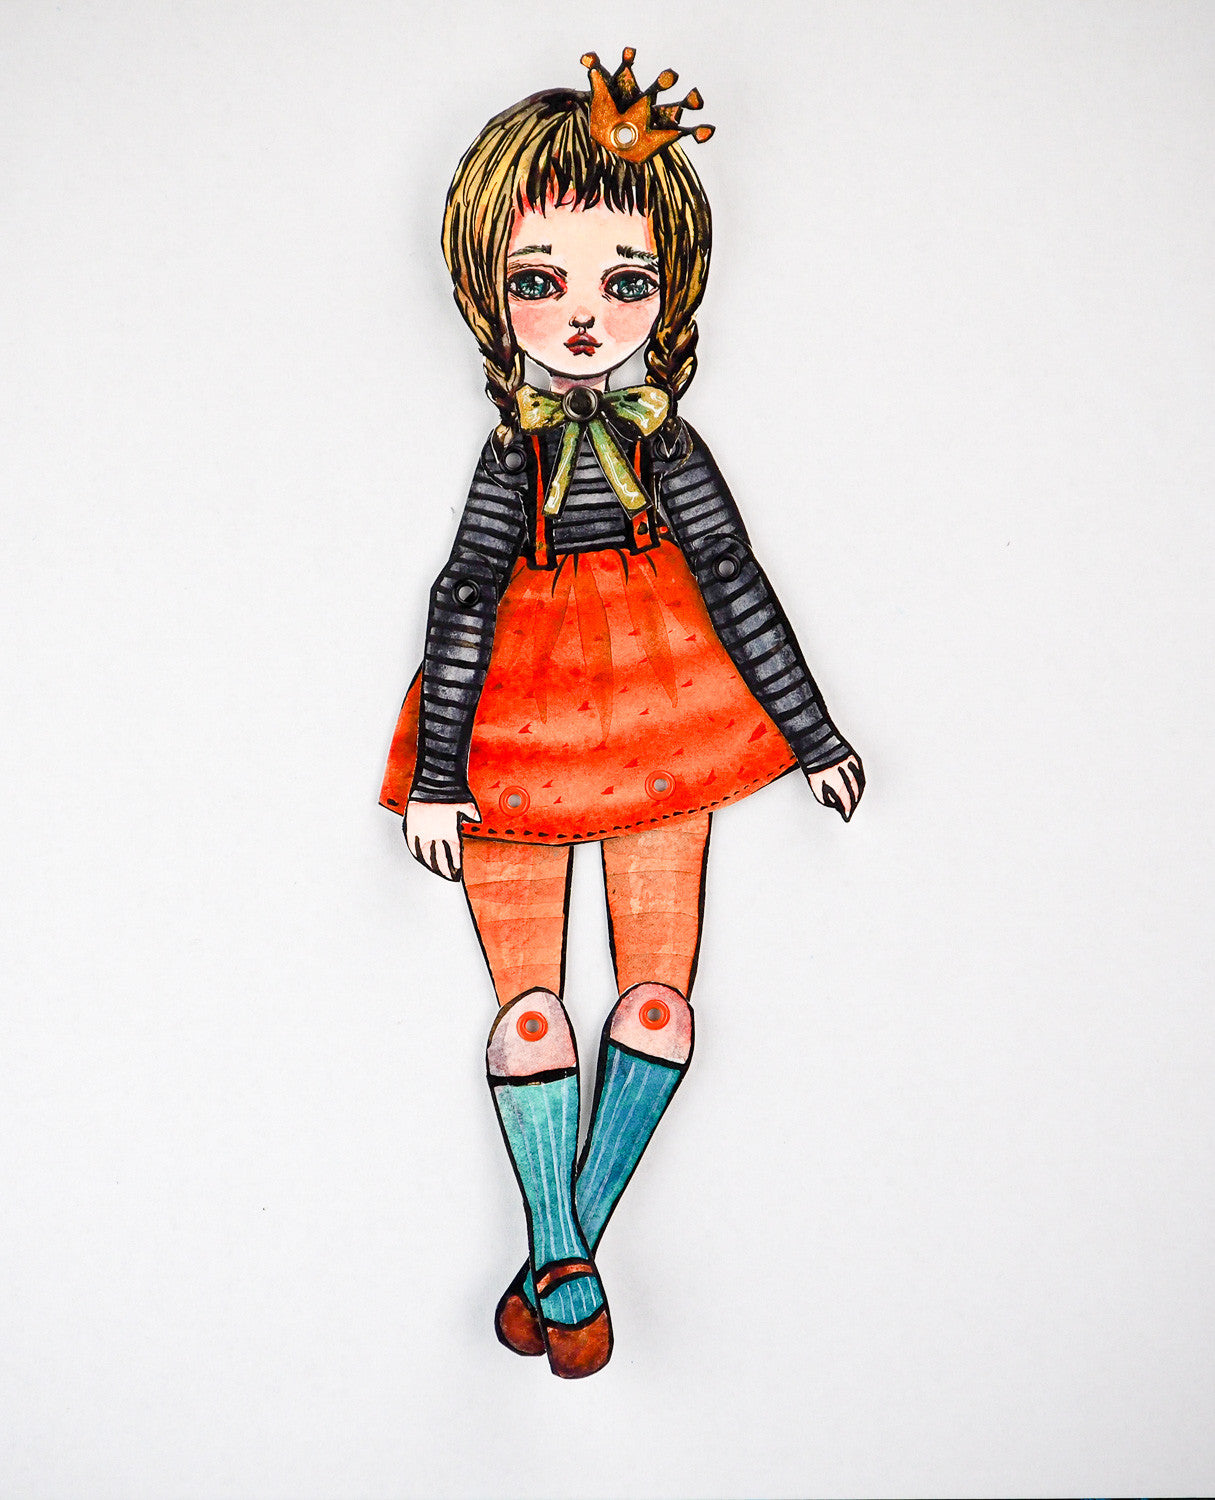 Danita painted a watercolor original painting and turned it into a paper doll jointed dress doll.